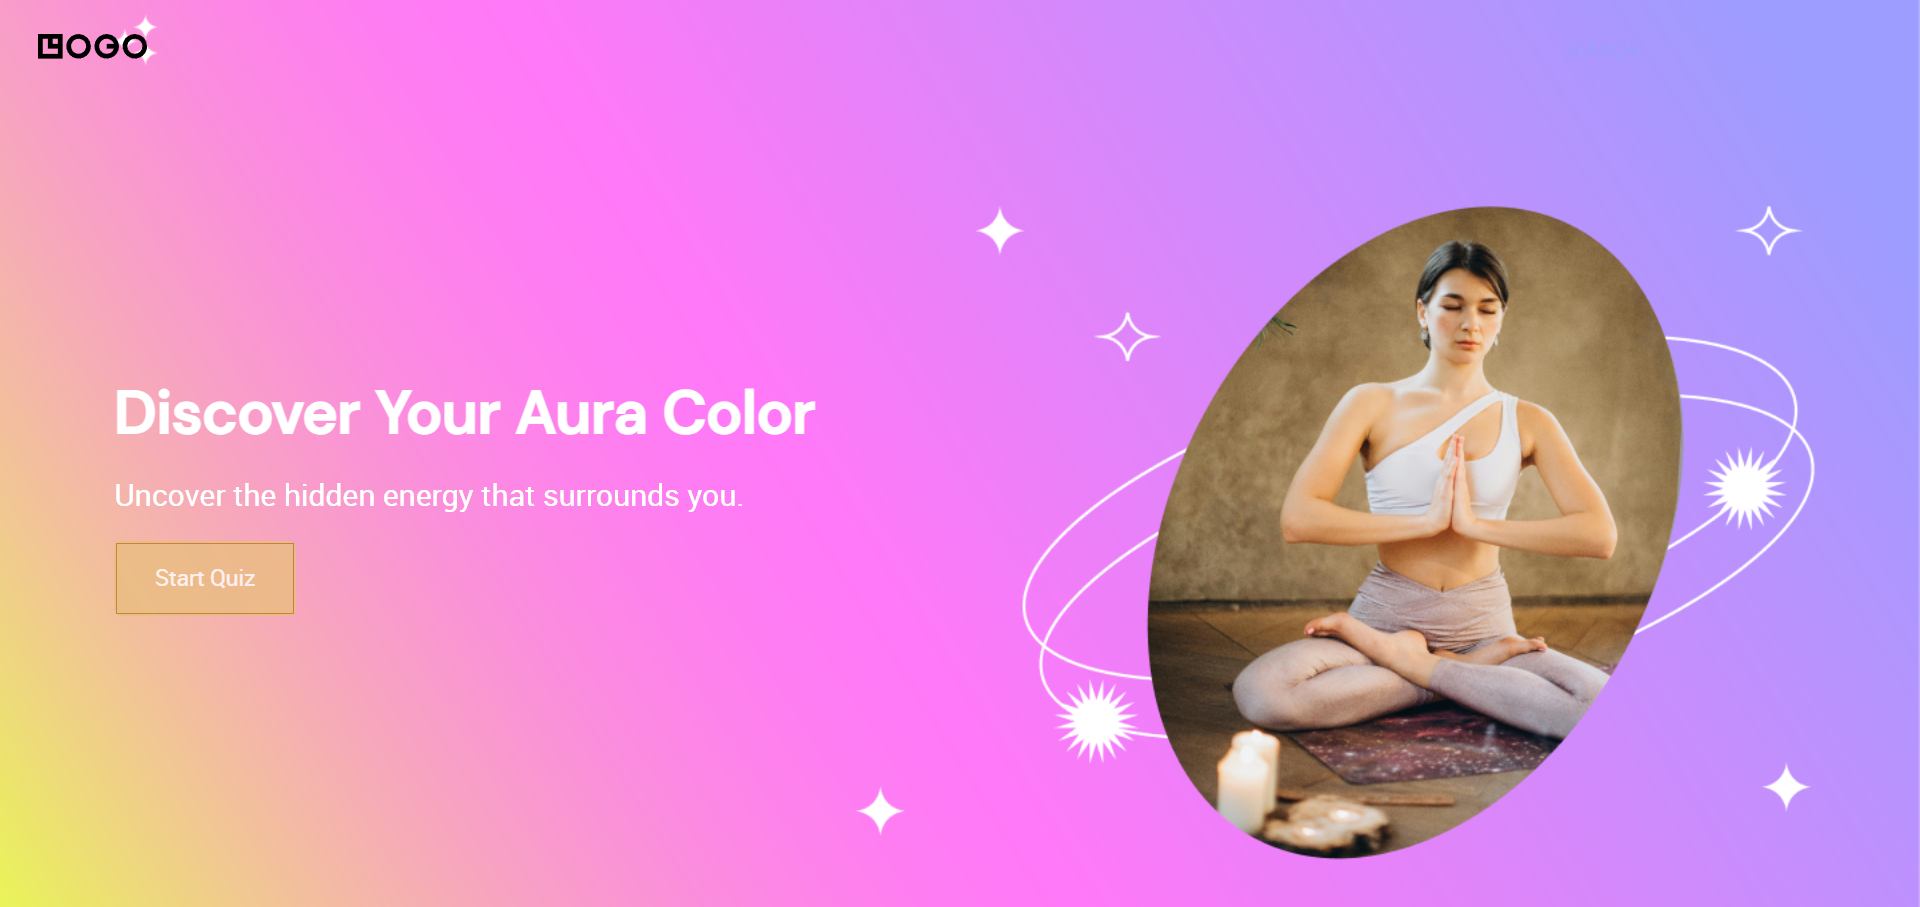 Discover Your Aura Color